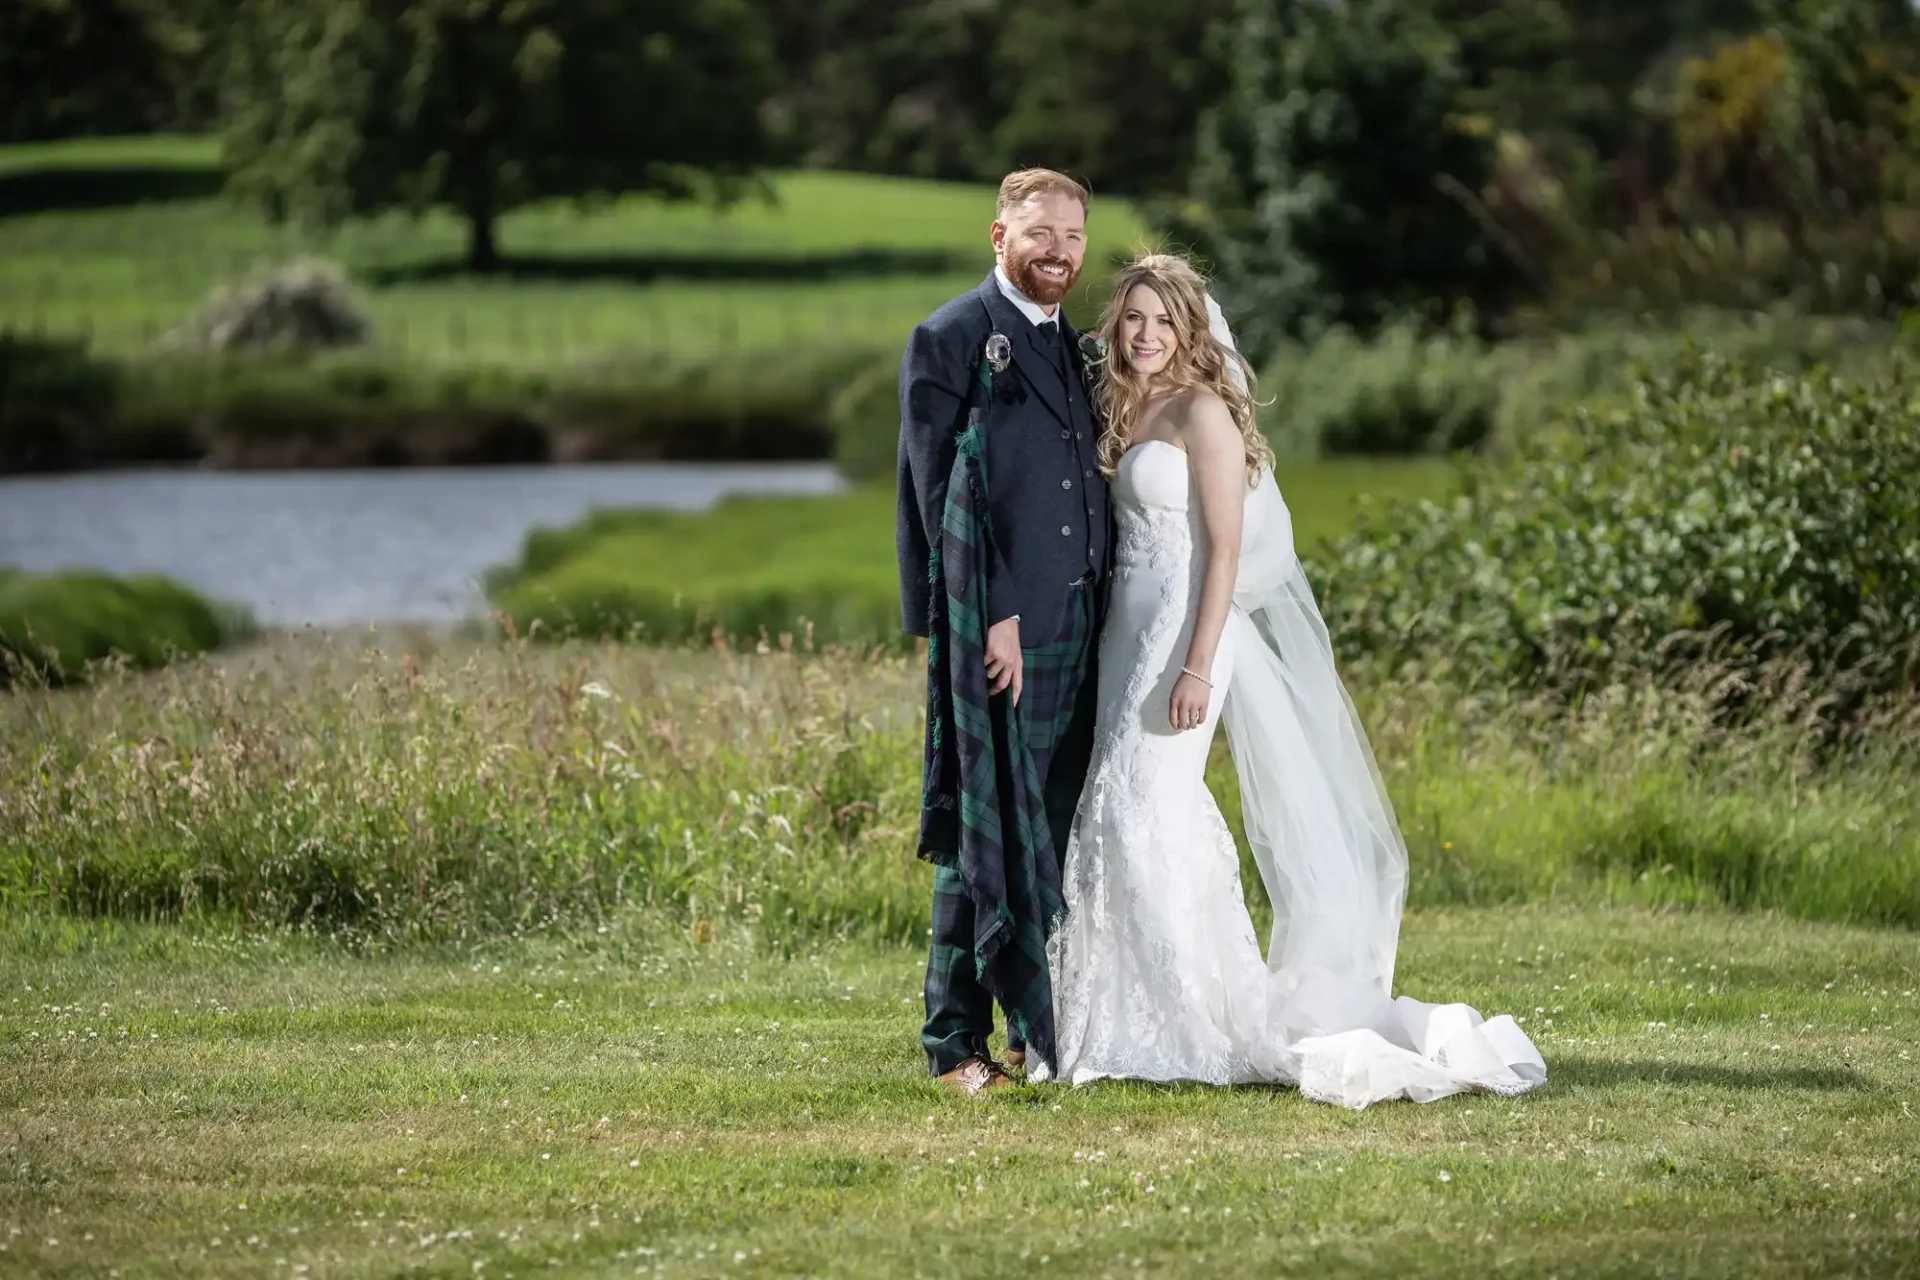 A bride and groom smiling outdoors in formal wedding attire, with a lush green backdrop and a small pond.